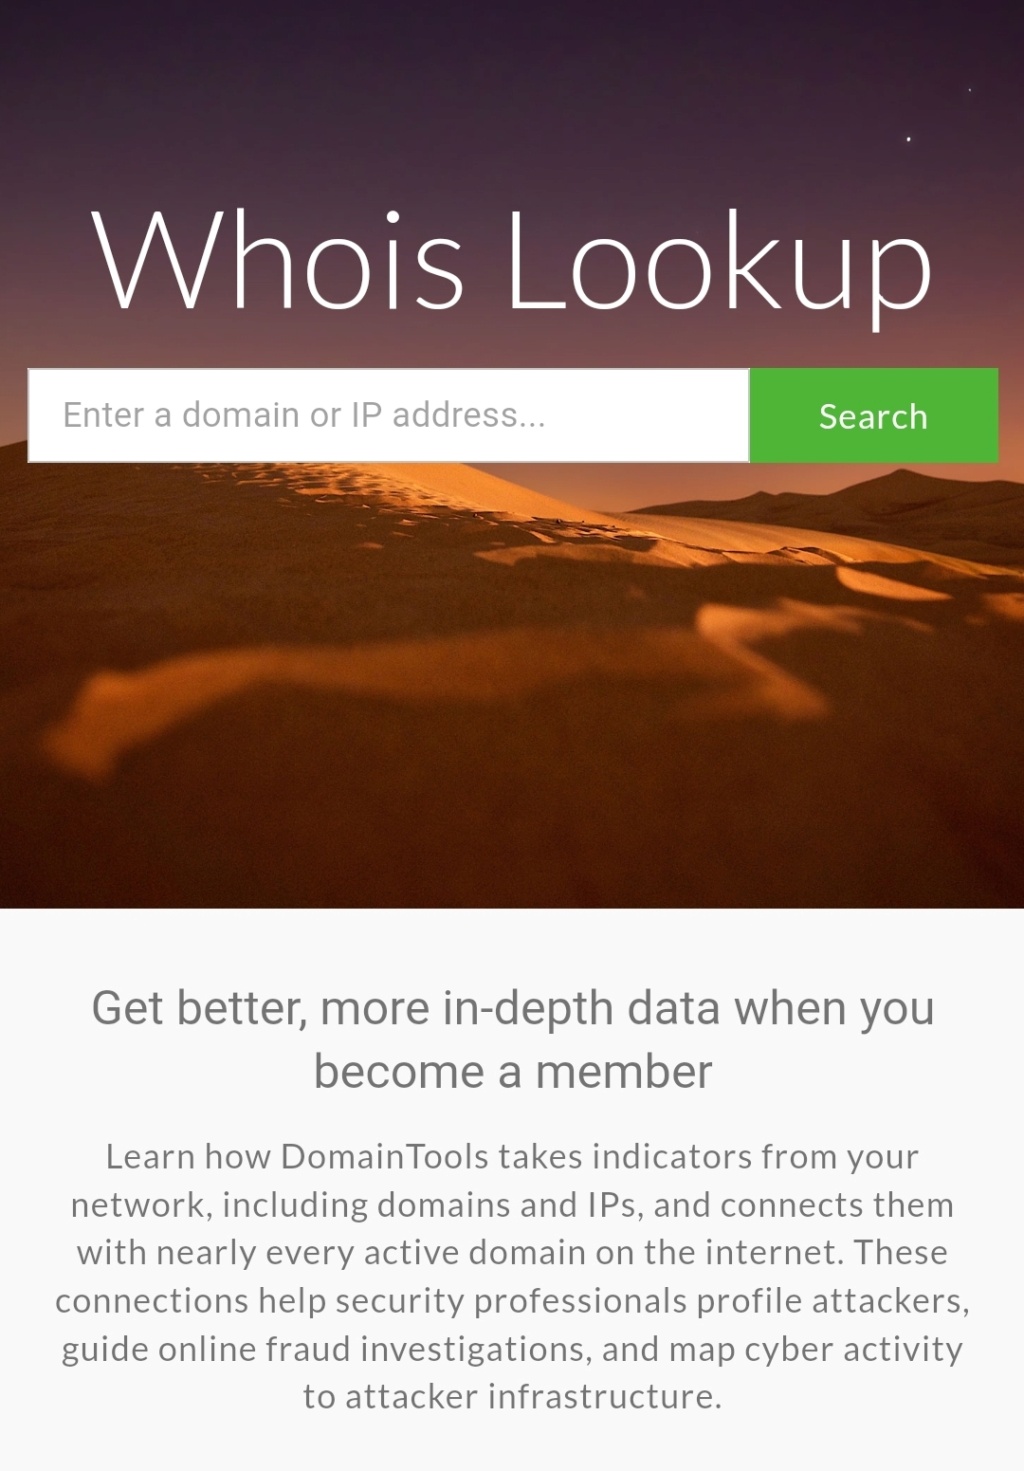  Whois Lookup Screen10